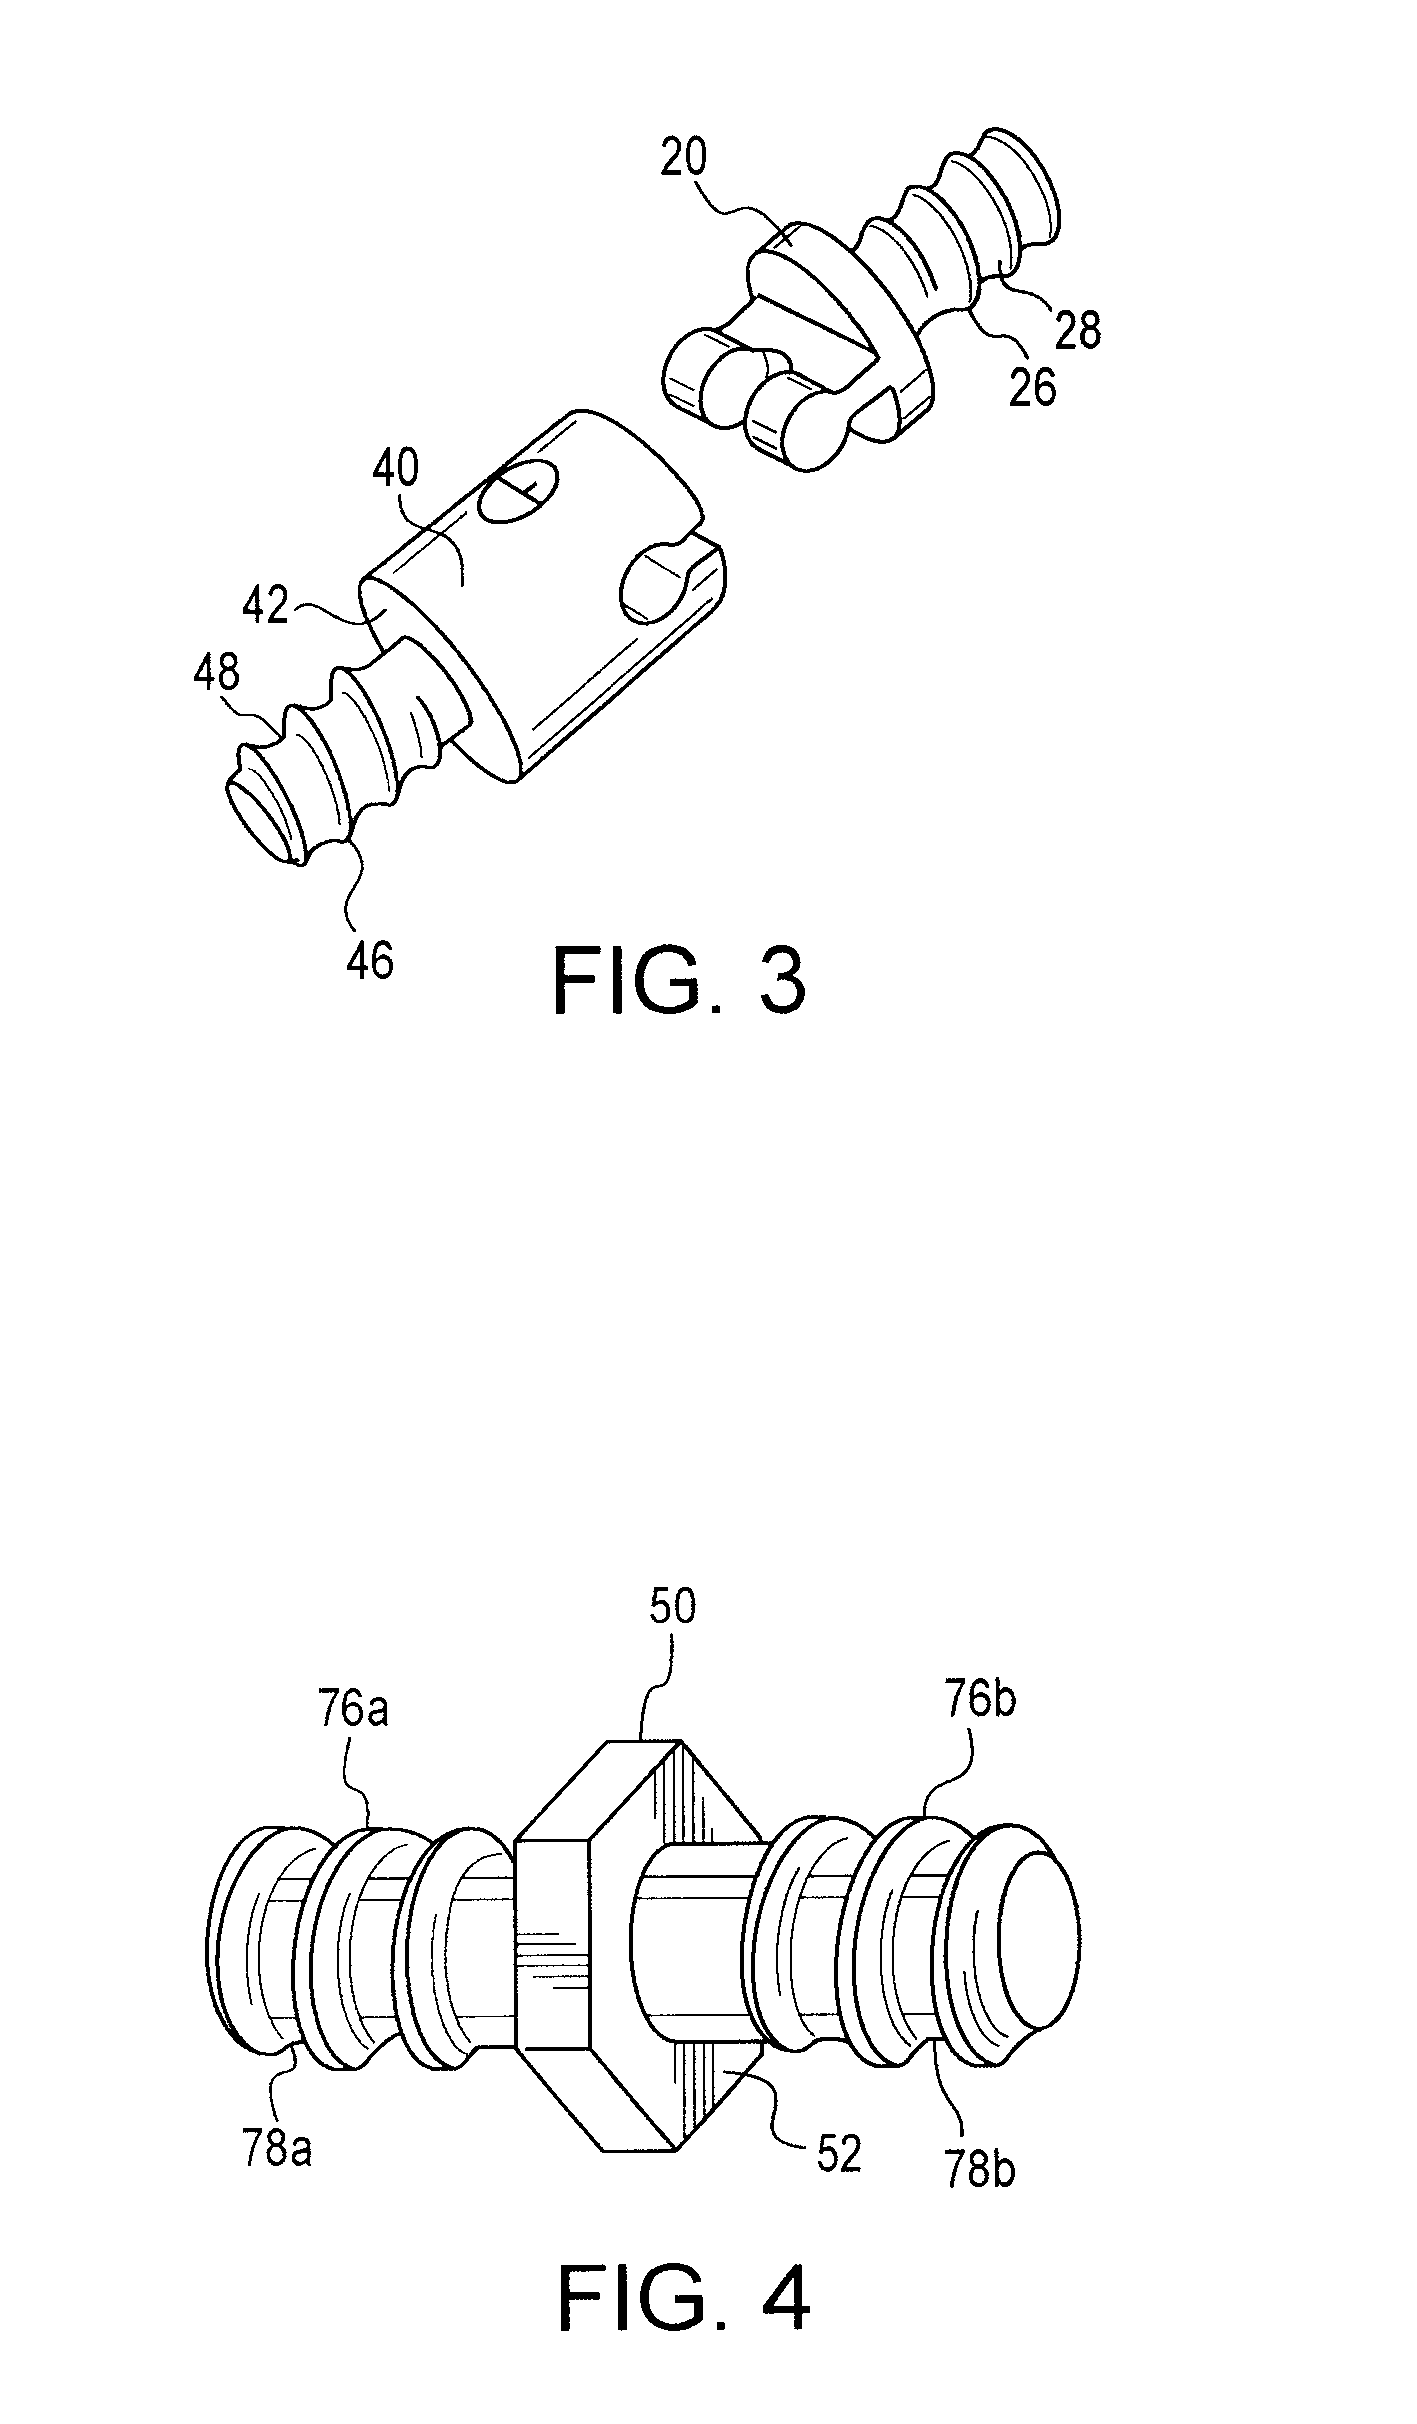 Sleeved coupling